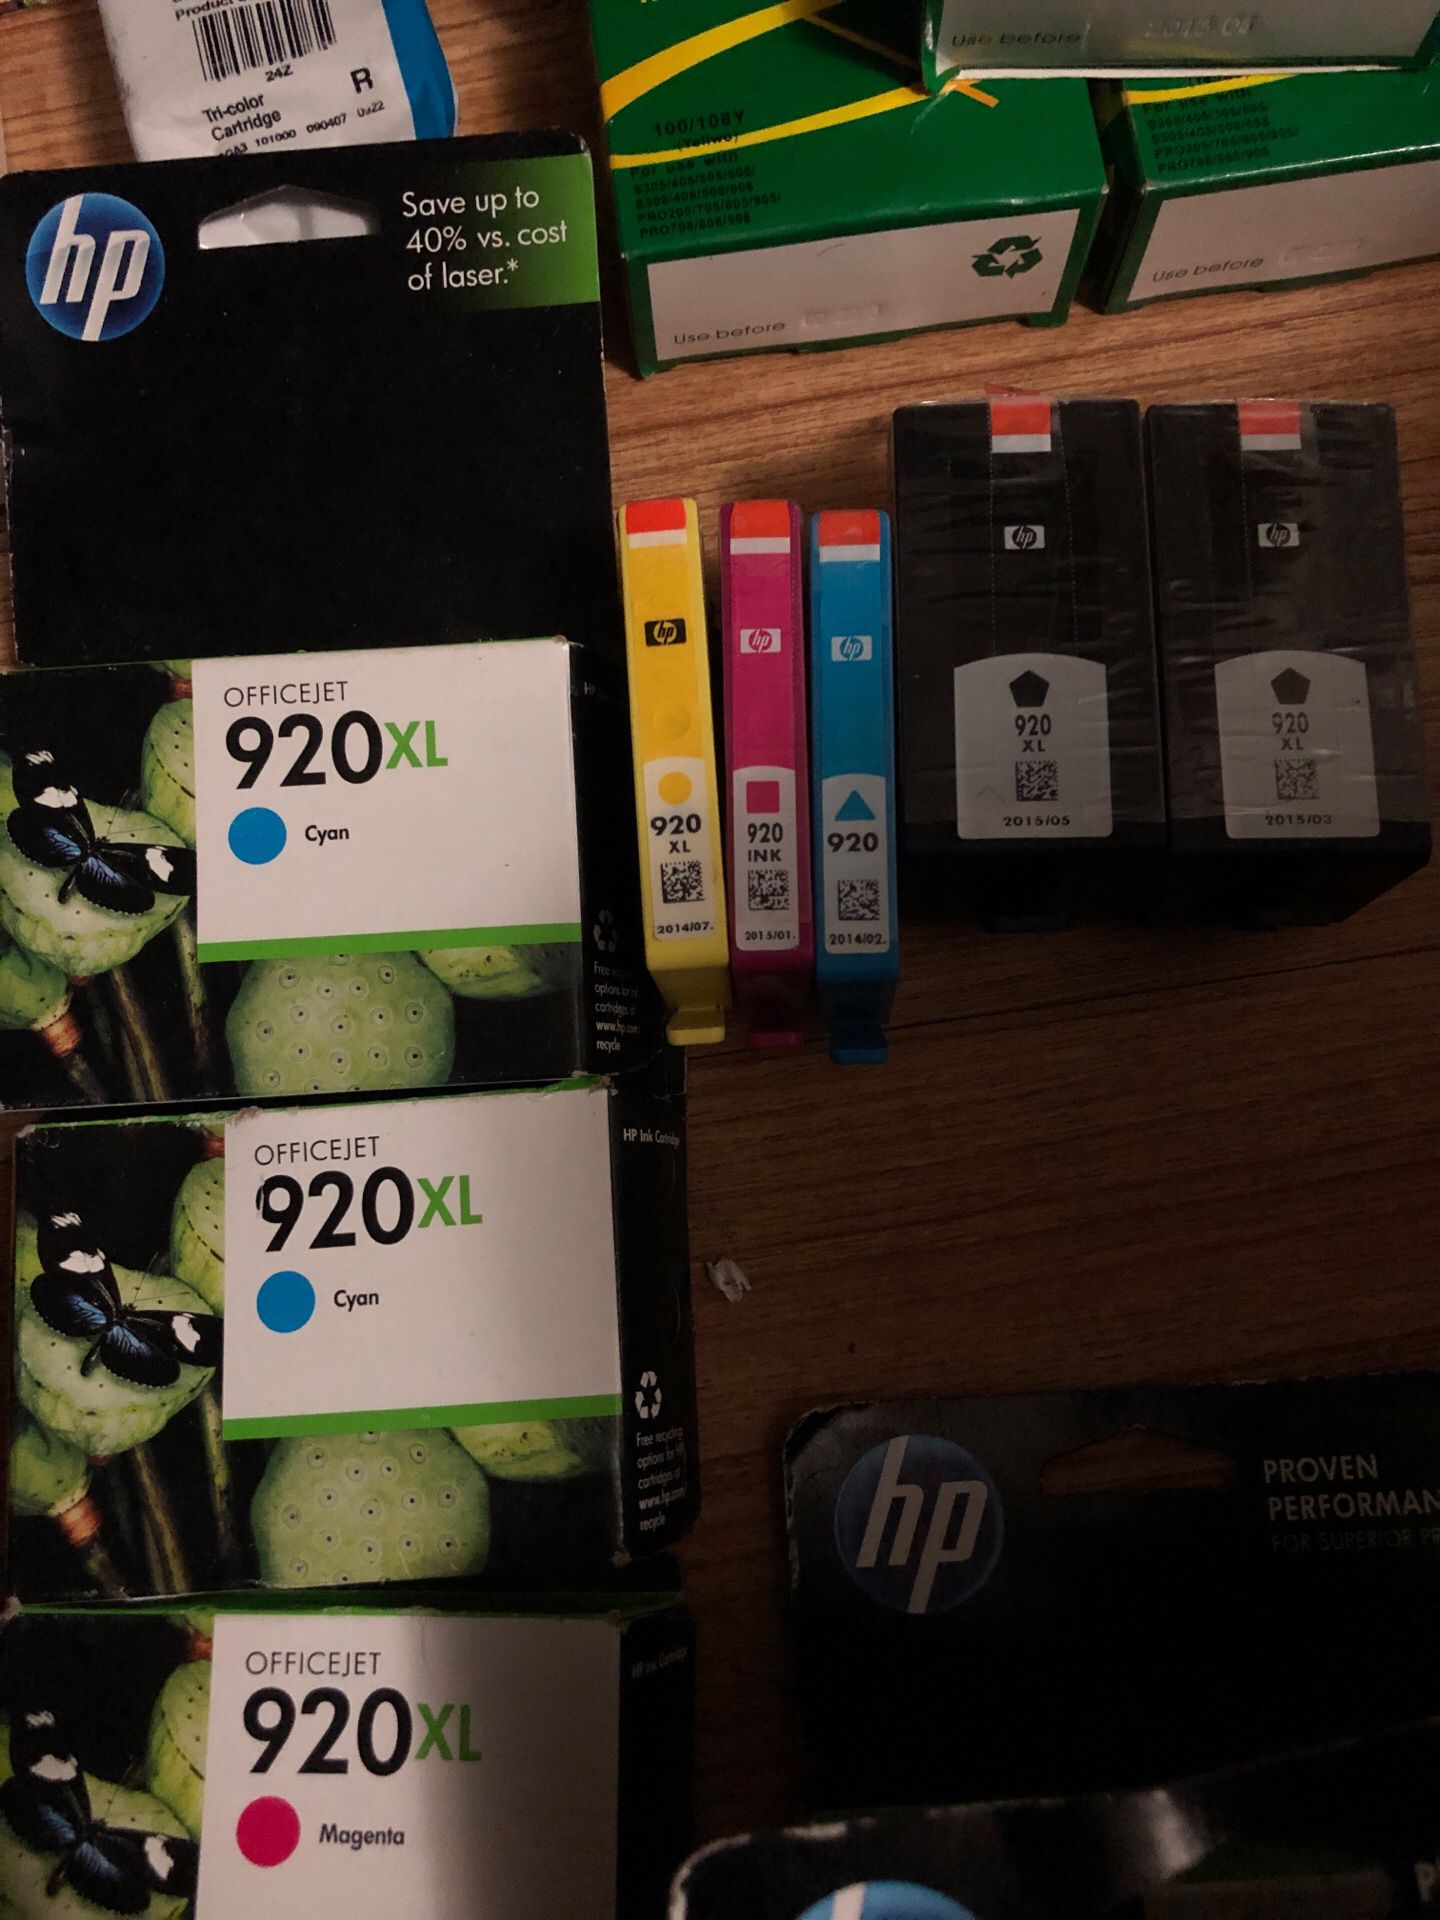 Here some more for that 920 printer ink 2 XL black not boxed but was